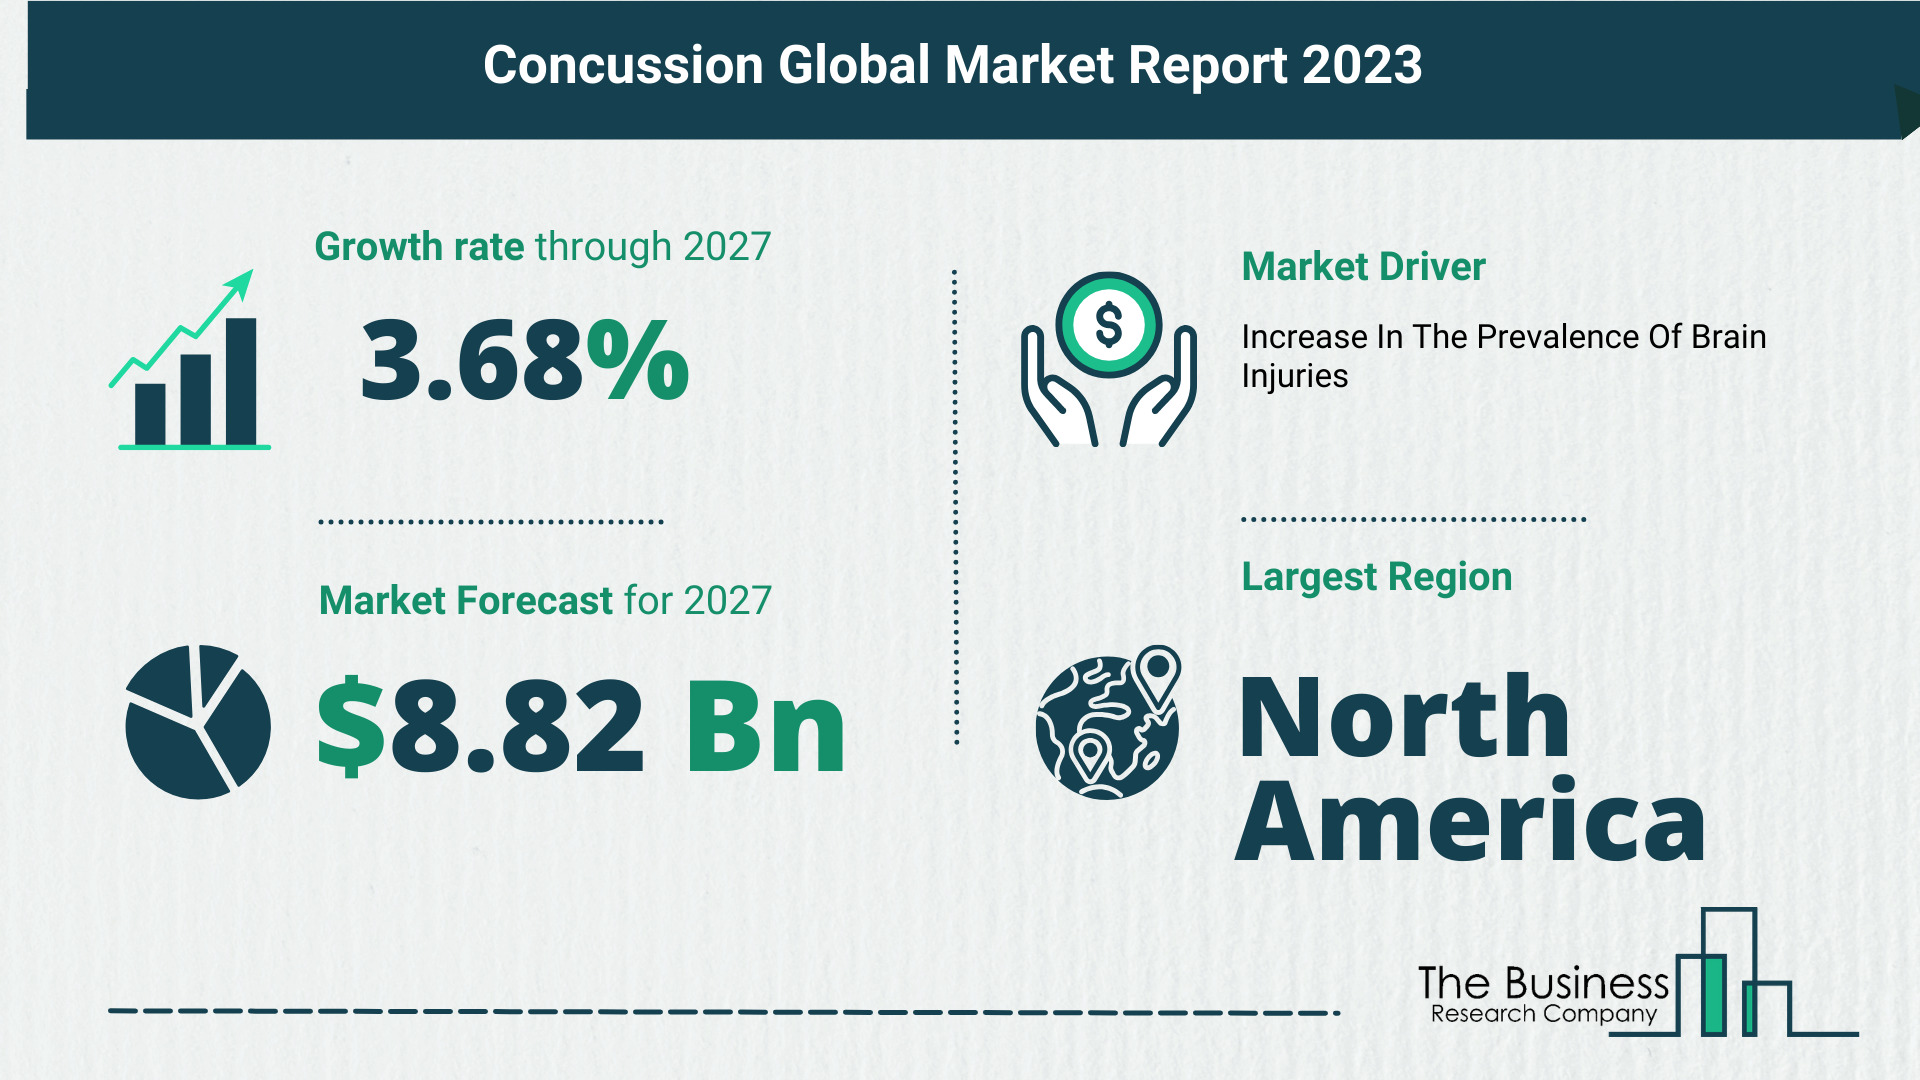 Overview Of The Concussion Market 2023: Size, Drivers, And Trends